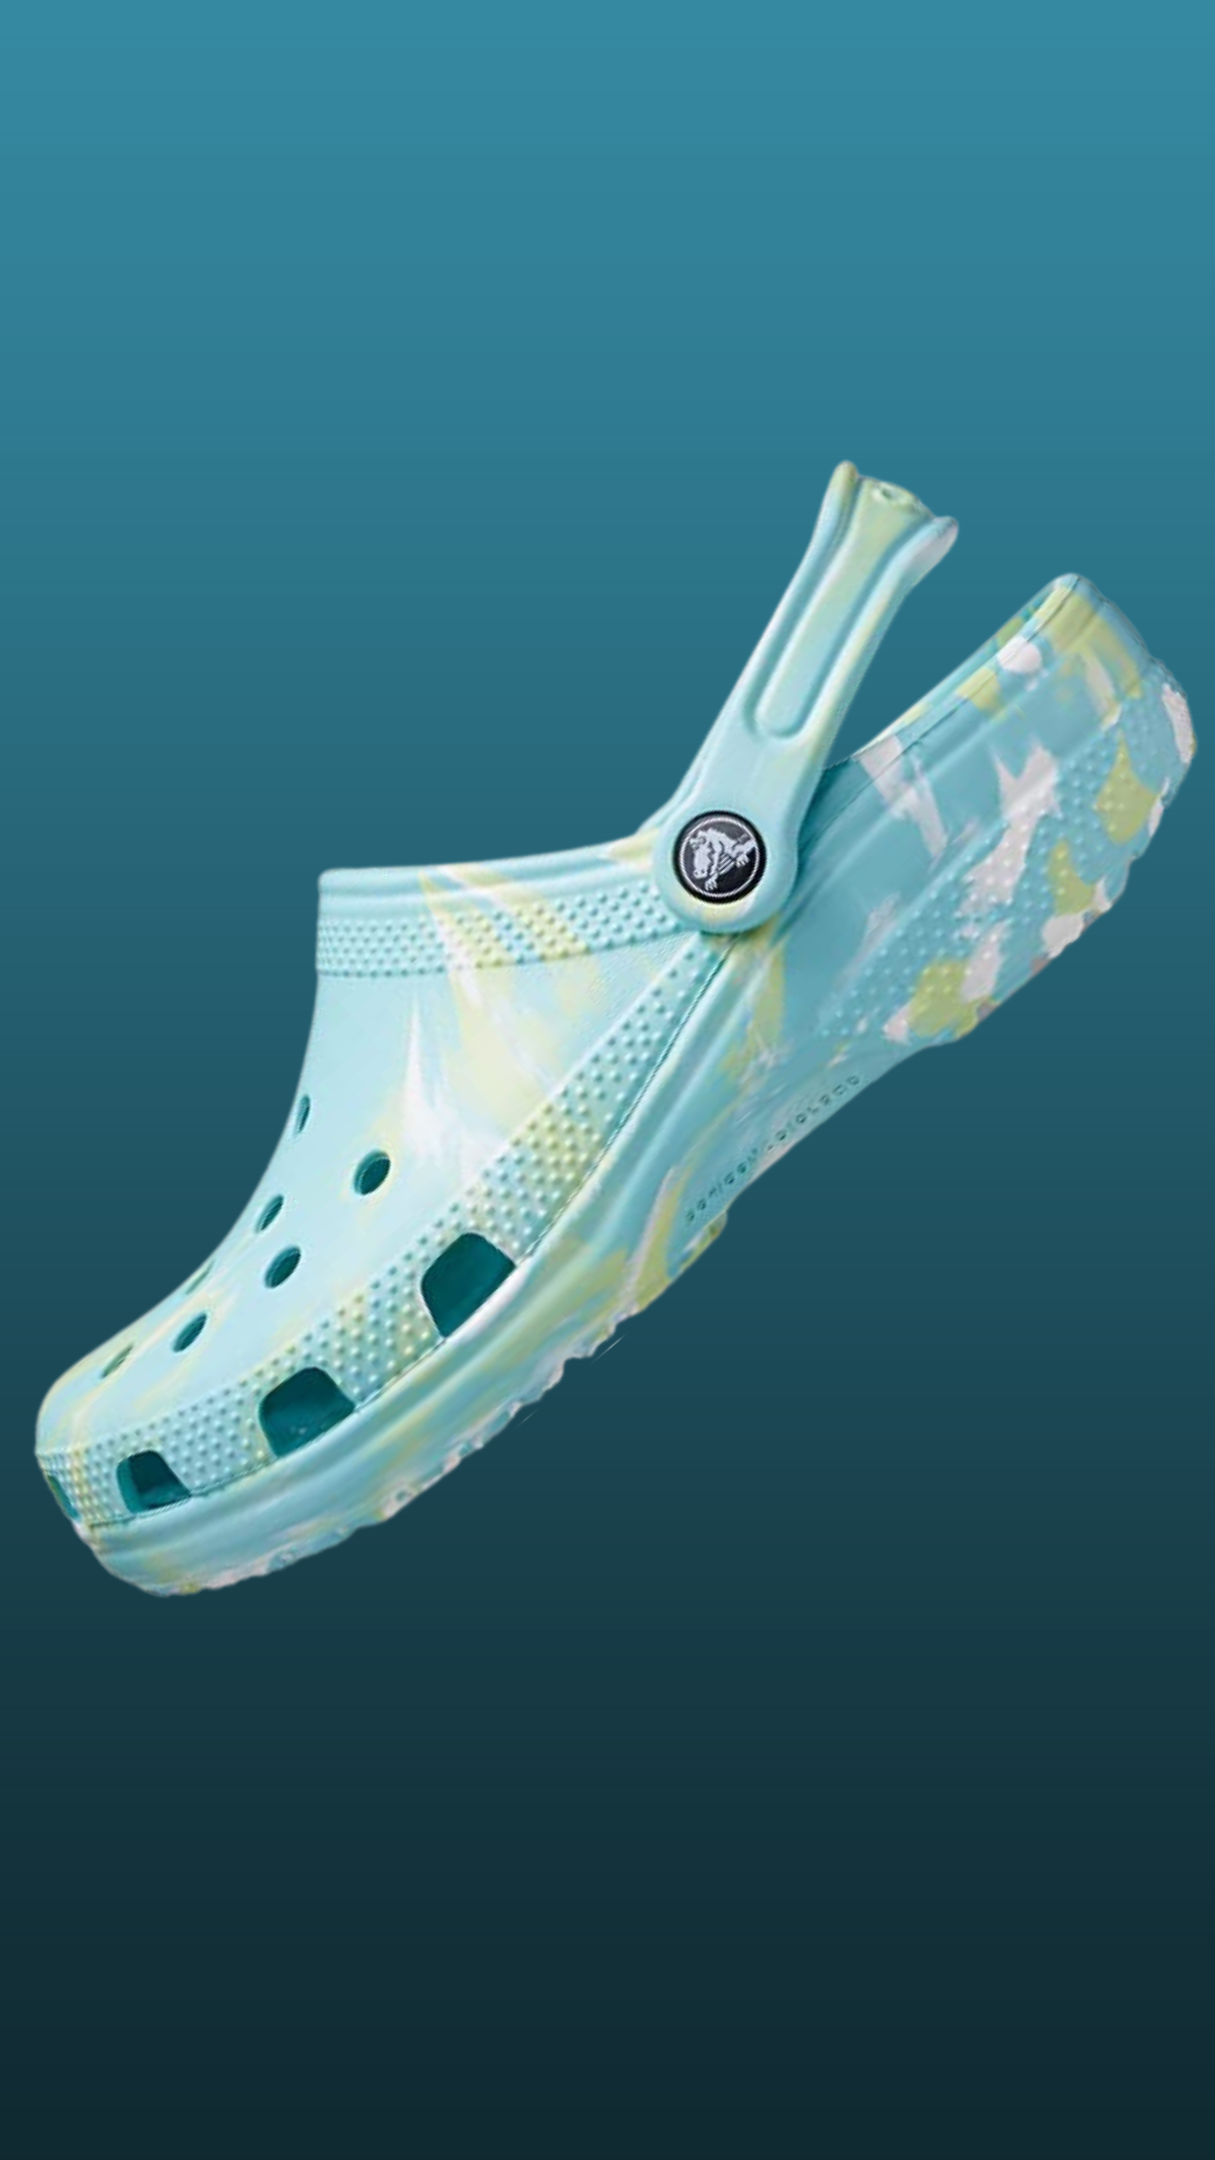 SOLD OUT - Crocs Unisex-Adult Classic Marbled Tie-dye Clog | GreenLifeHuman Emporium